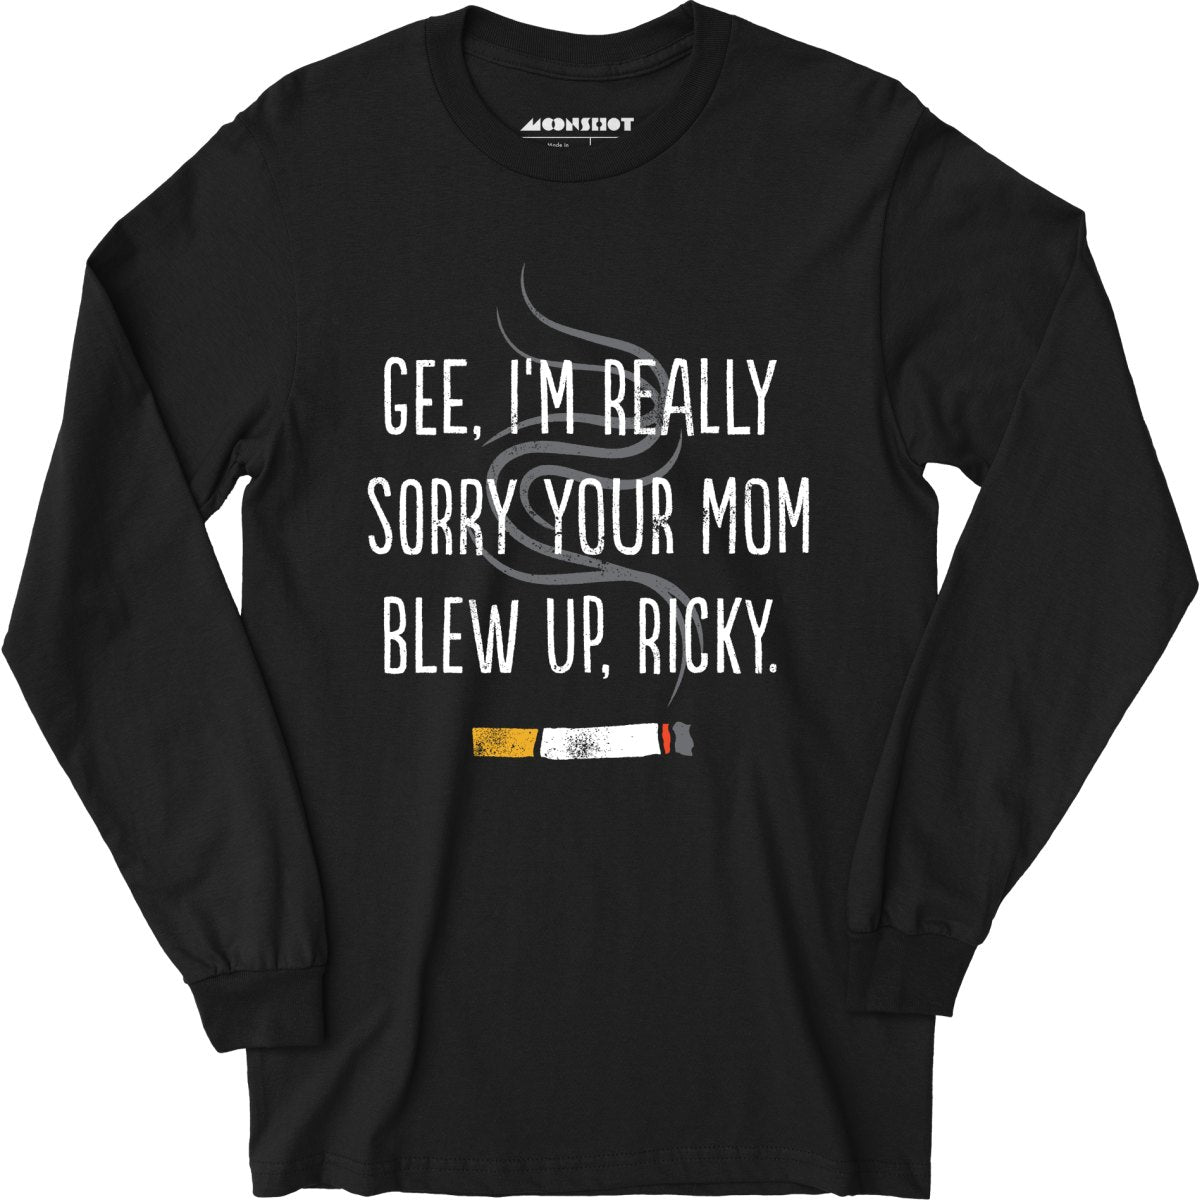 Gee, I'm Really Sorry Your Mom Blew Up, Ricky - Long Sleeve T-Shirt